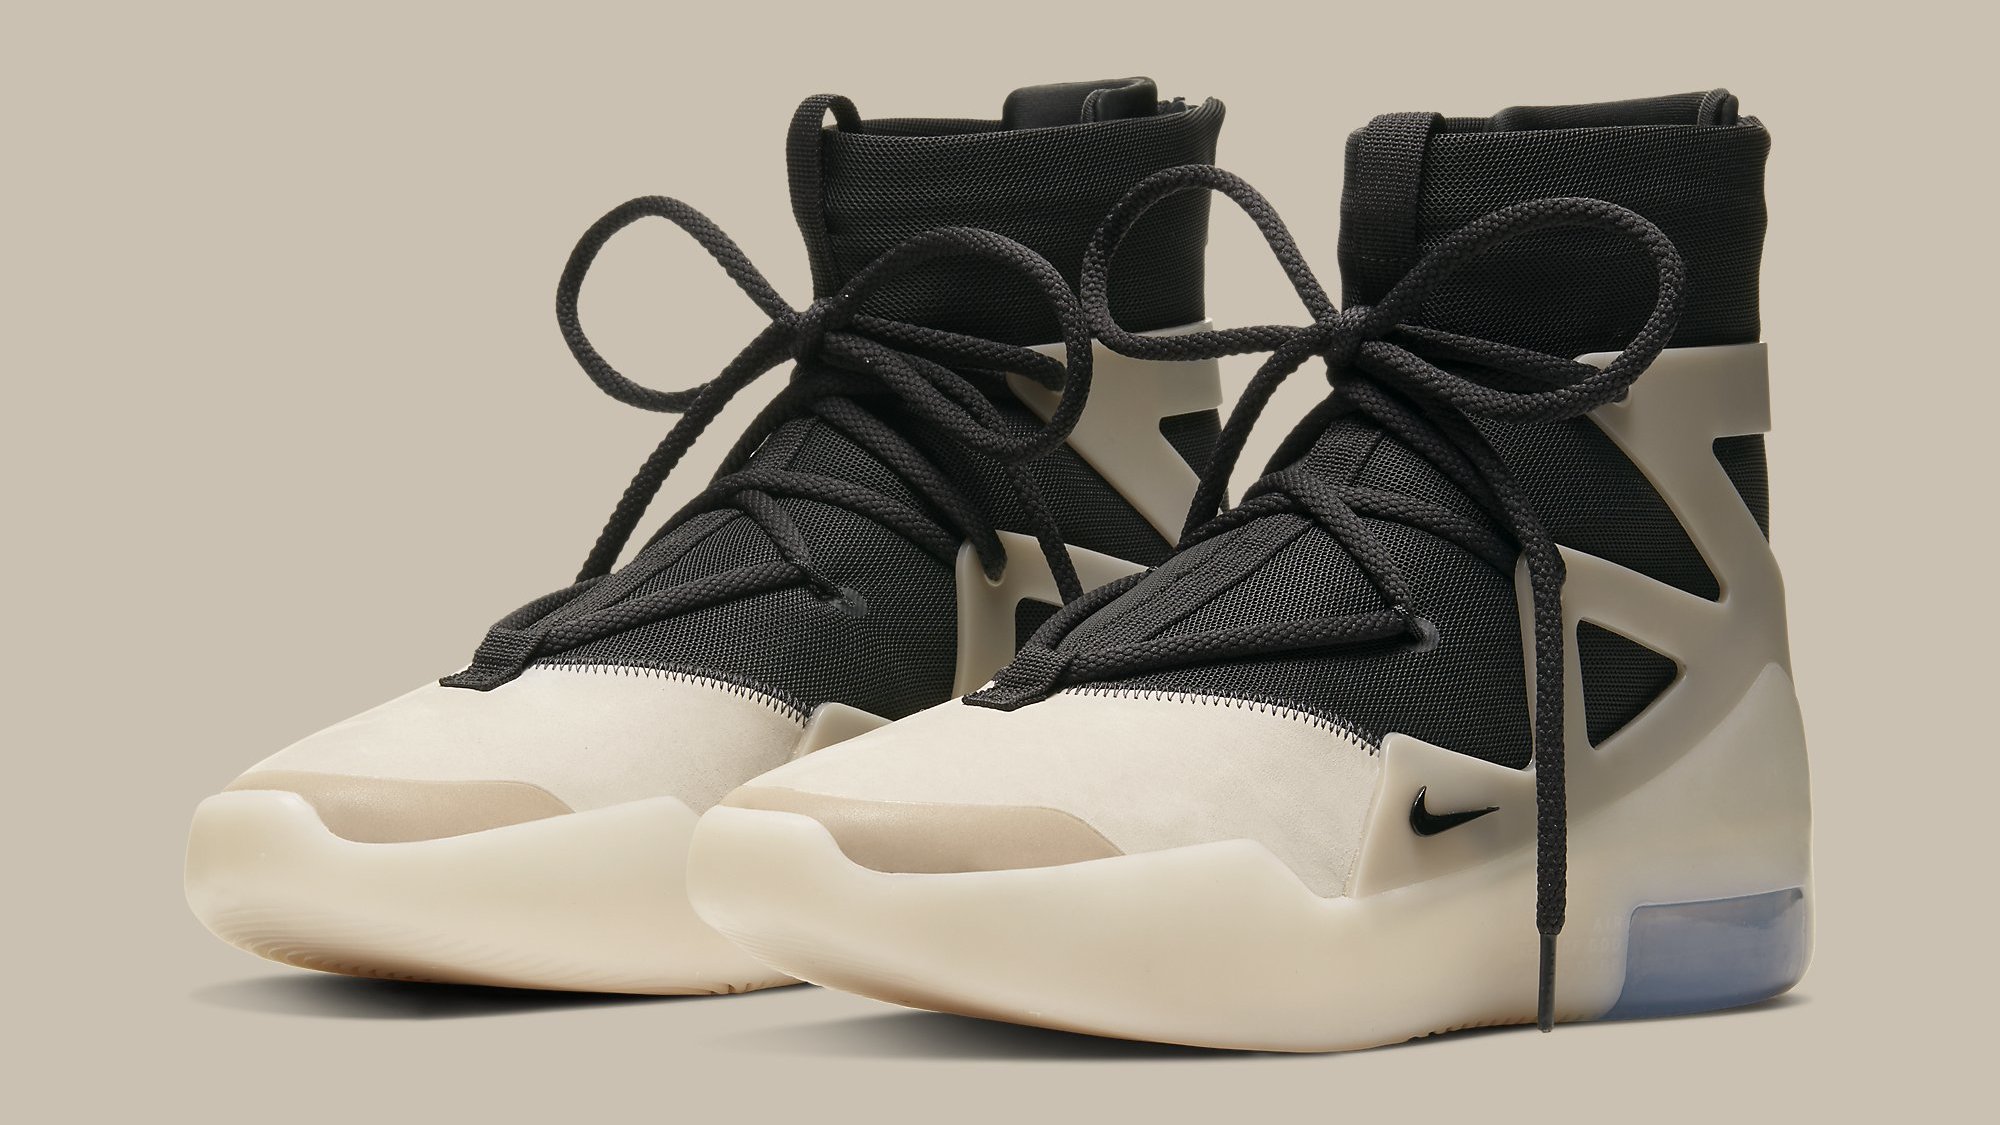 Are 'String' Air Fear of God 1s Dropping Again? | Complex